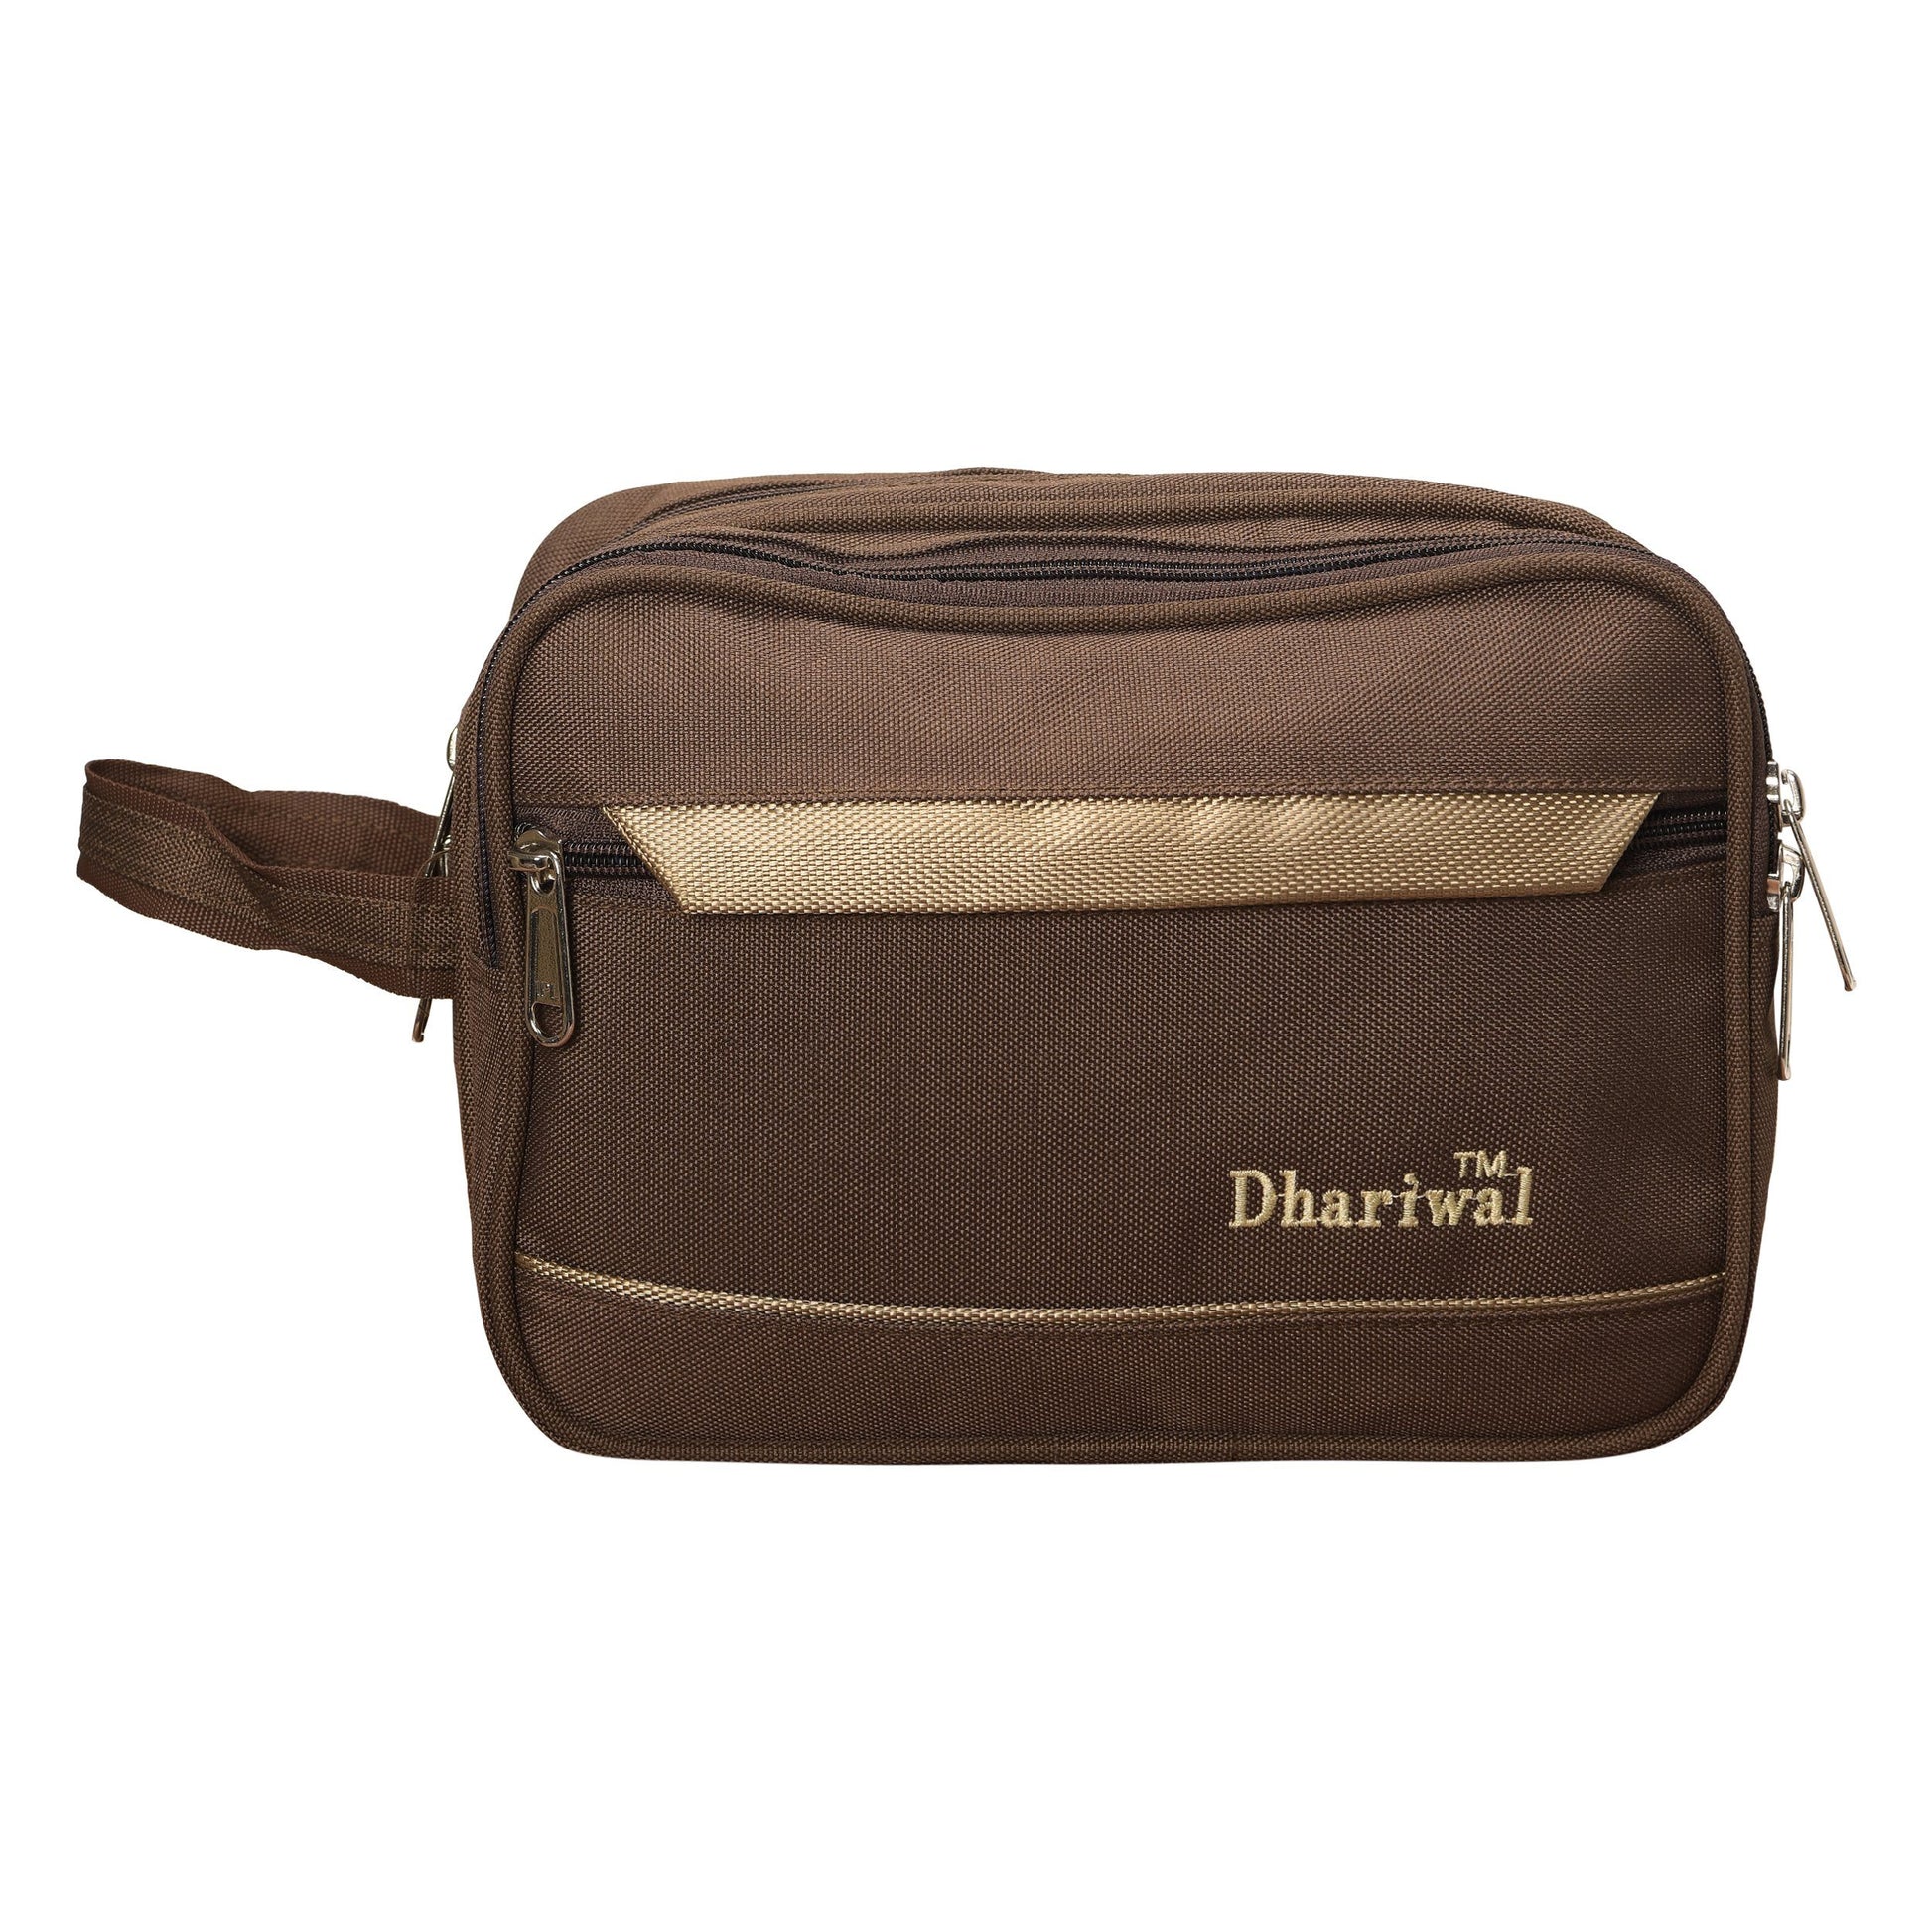 Dhariwal Cash Pouch for Cash, Keys, Shaving Kit, Cosmetics, Gadgets - SMALL Cash Bags Mohanlal Jain (Dhariwal Bags) Brown 